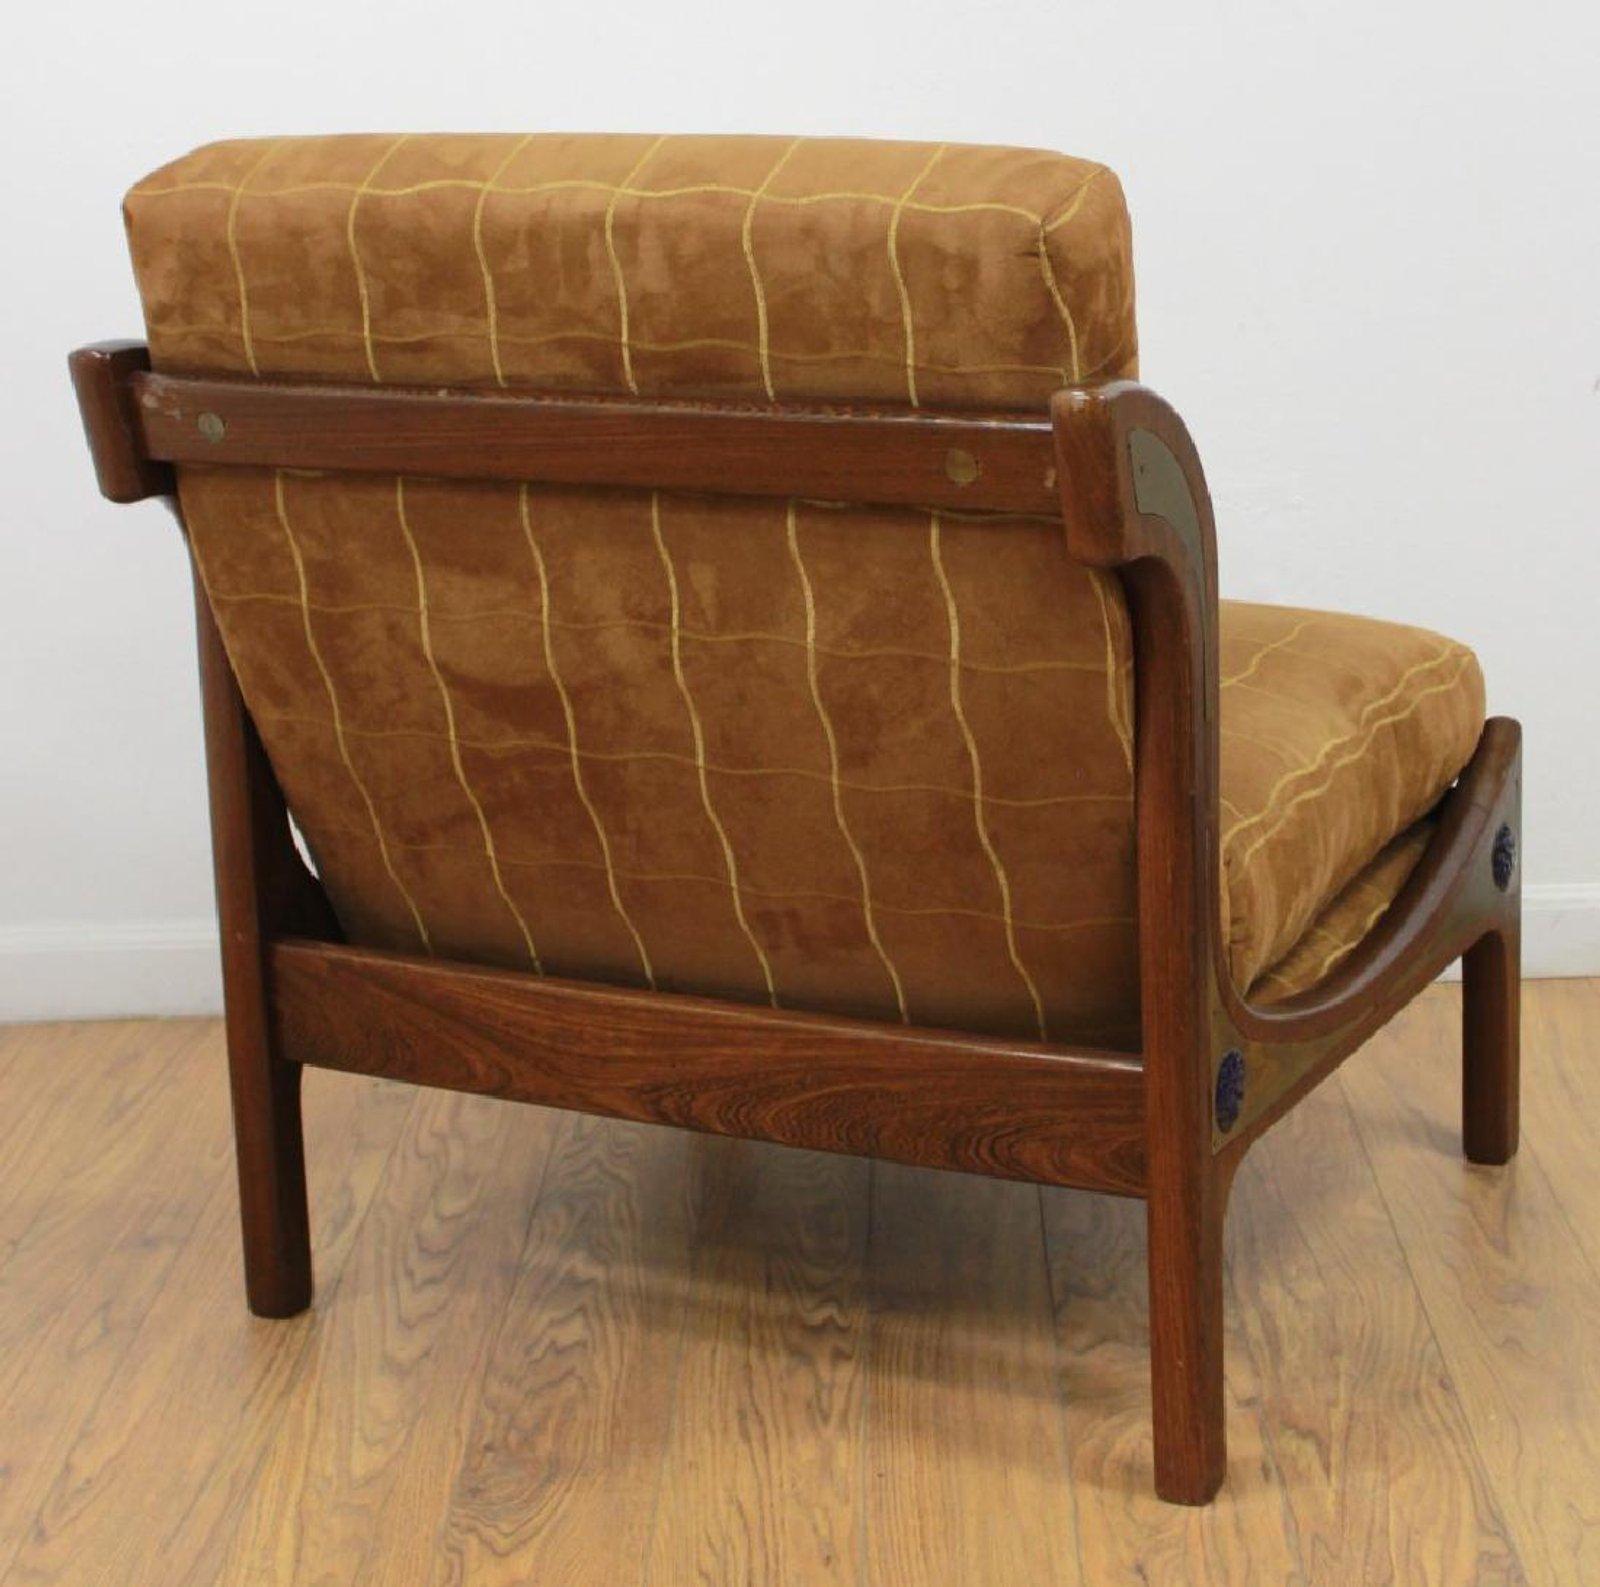 Pair of Ib Kofod-Larsen Wenge Lounge Chairs for the Megiddo Collection In Good Condition For Sale In New York, NY